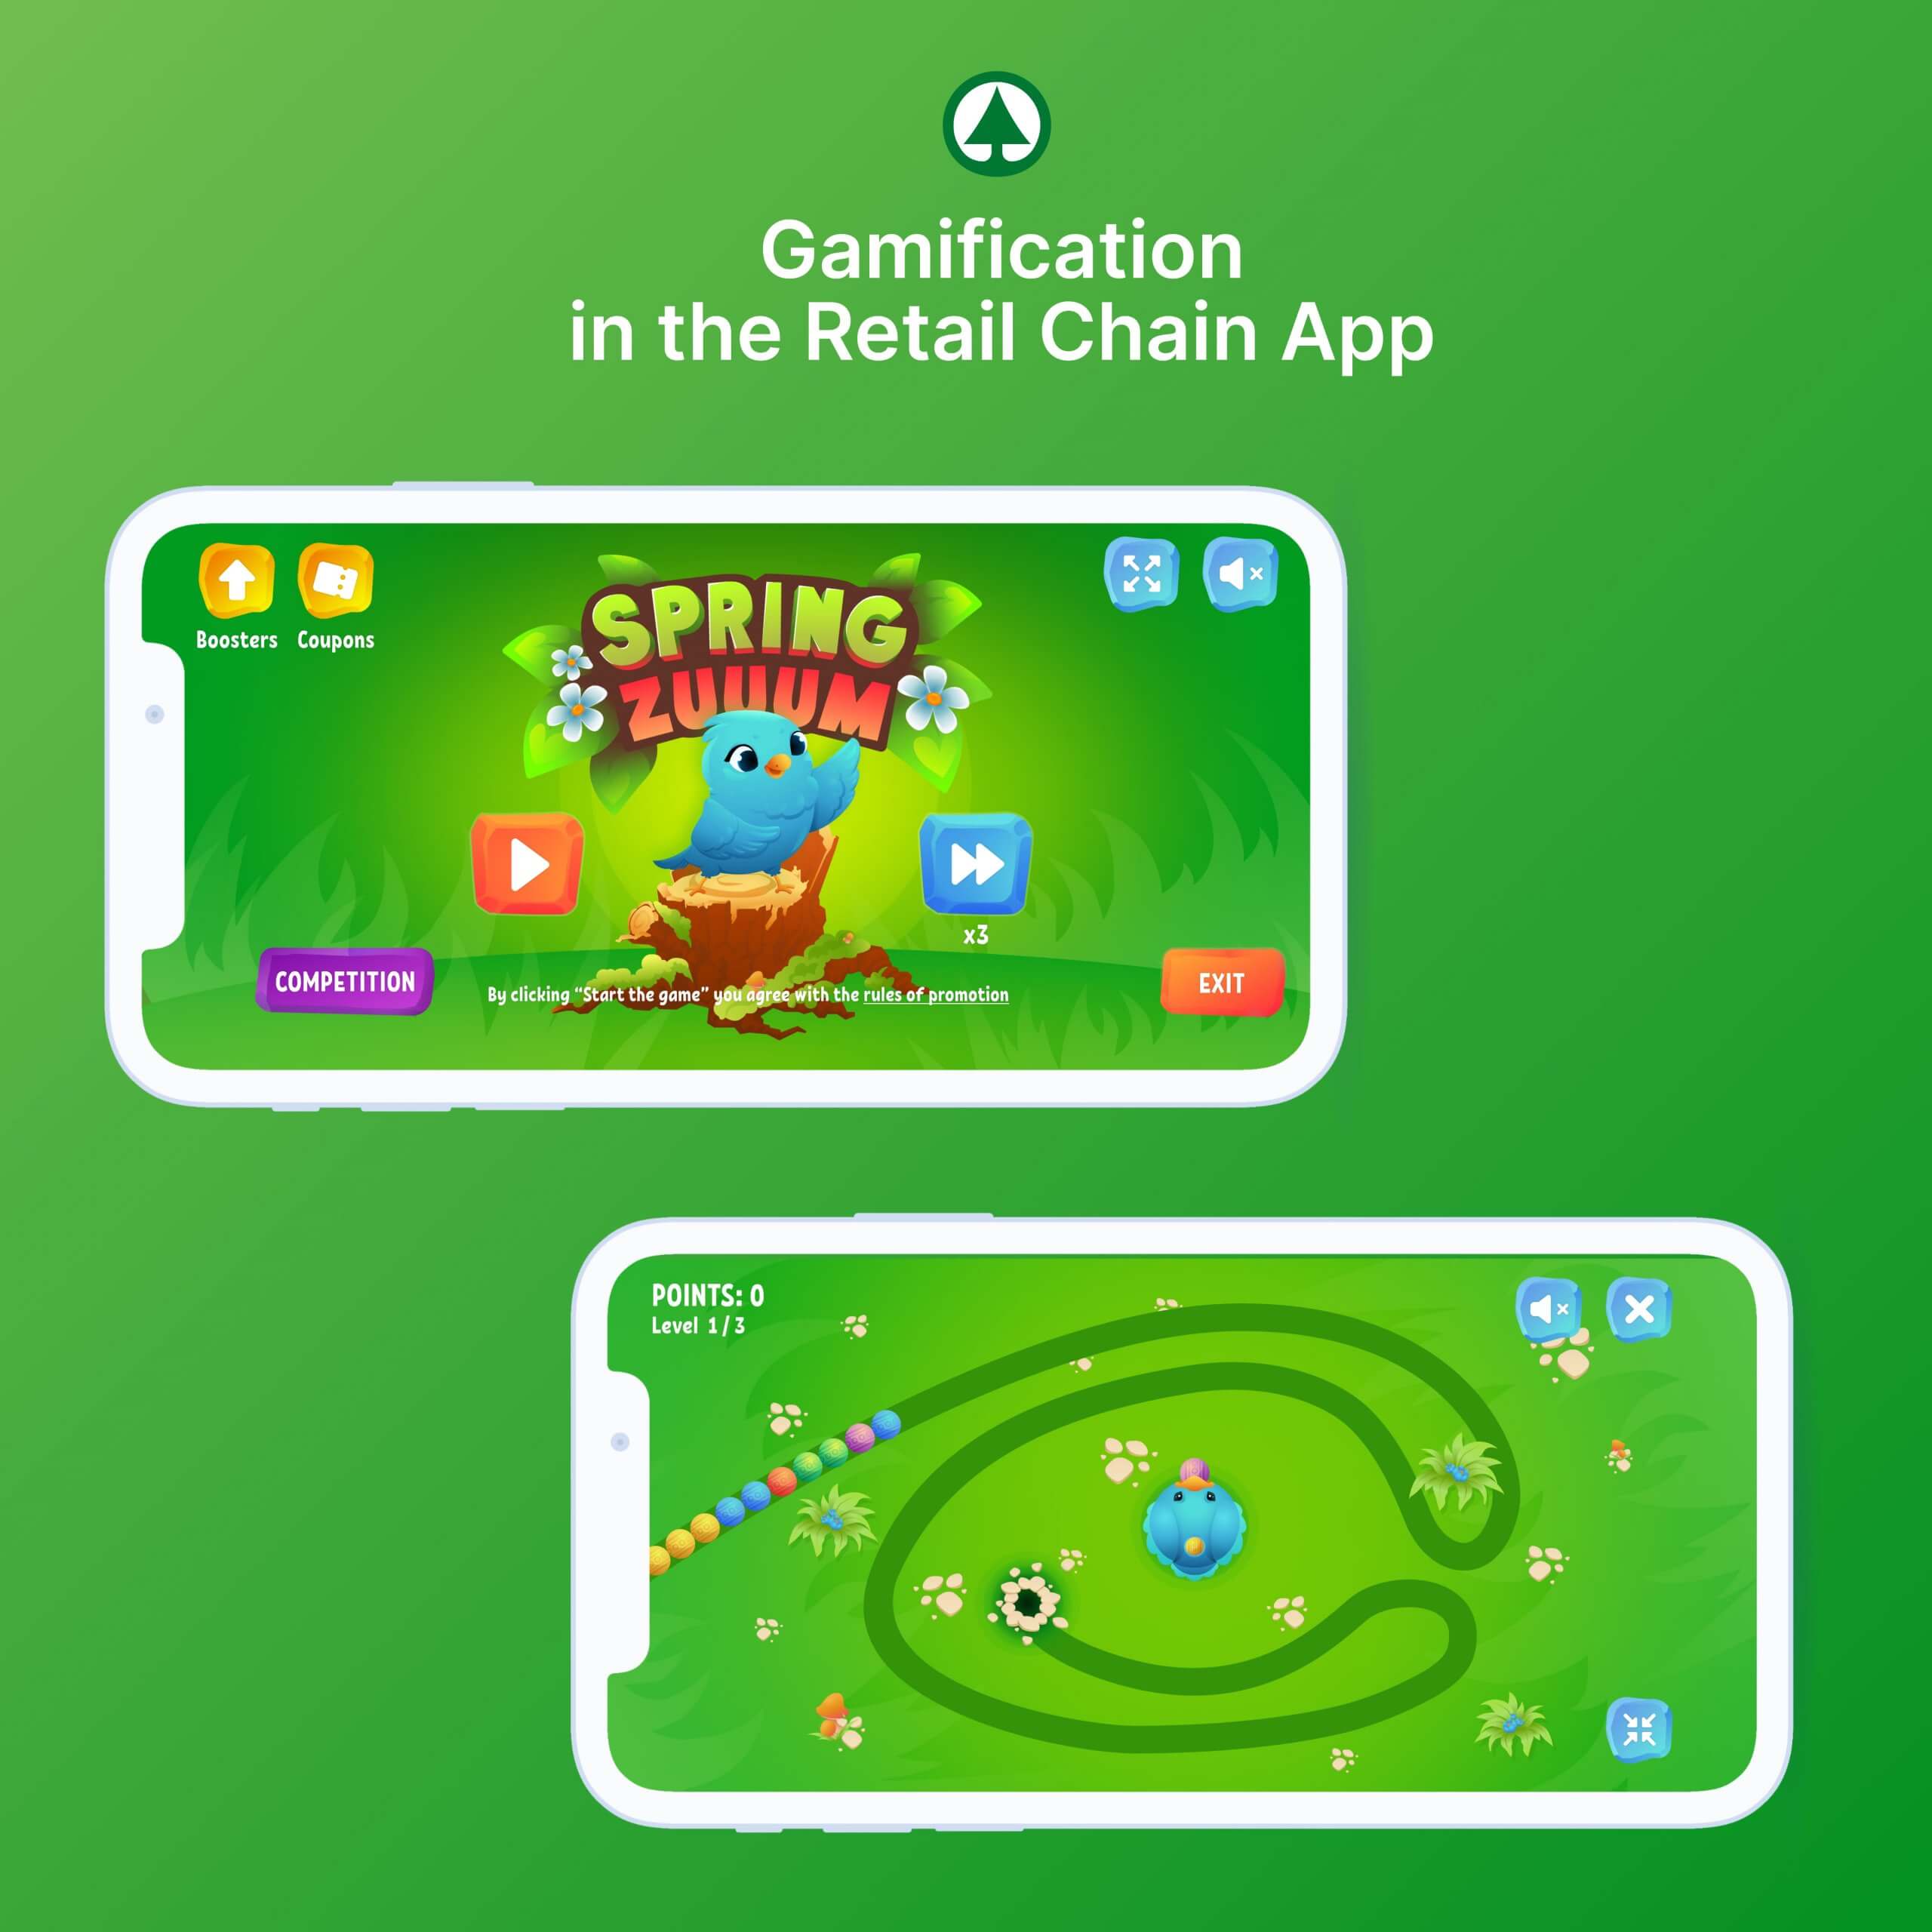 Gamification of a mobile application